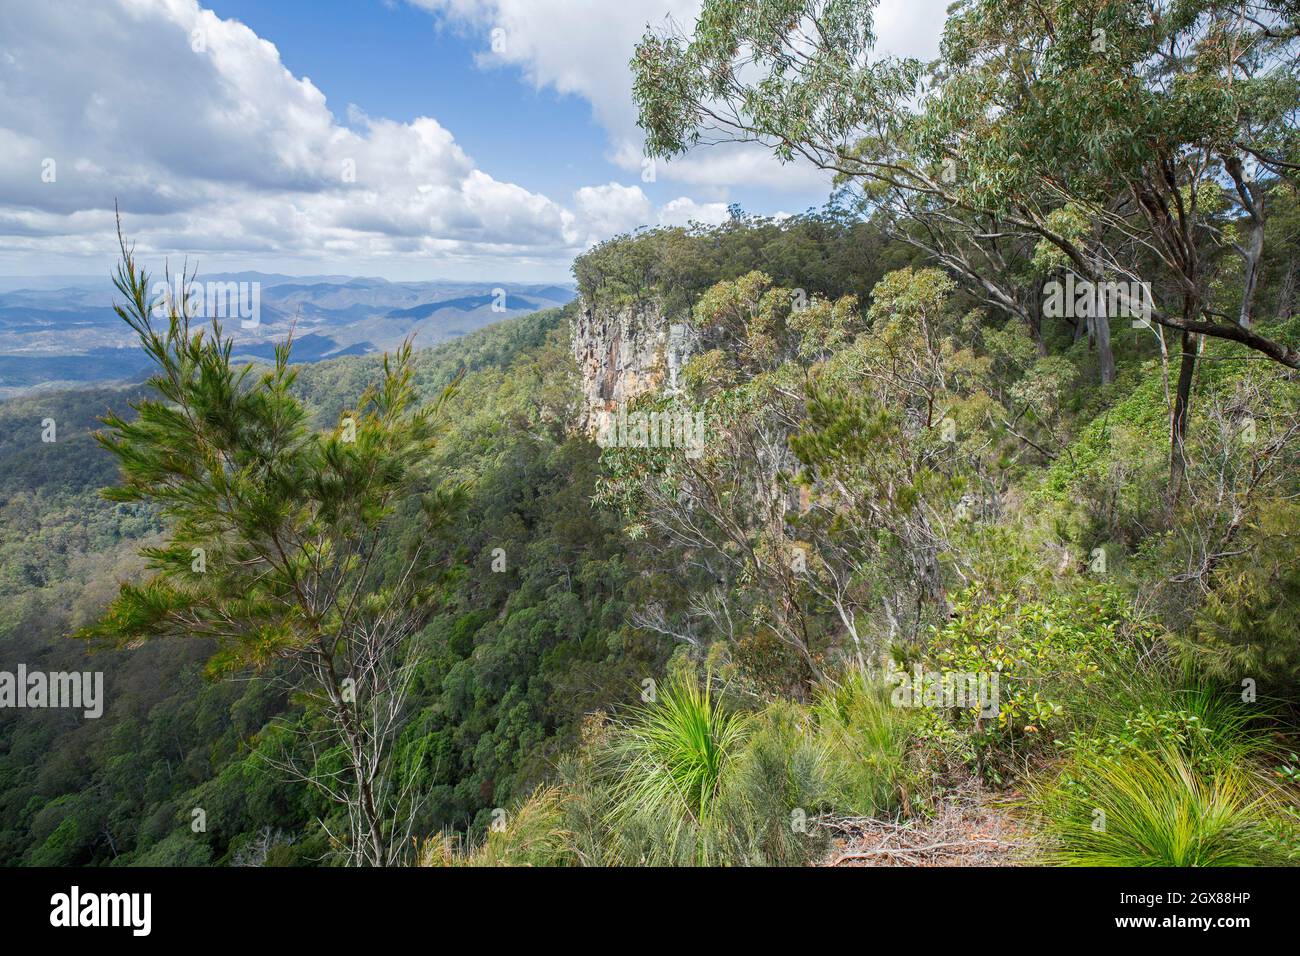 Spectacular view of forested landscape and cliffs from lookout at Kroombit Tops National Park in Great Dividing Range Australia Stock Photo